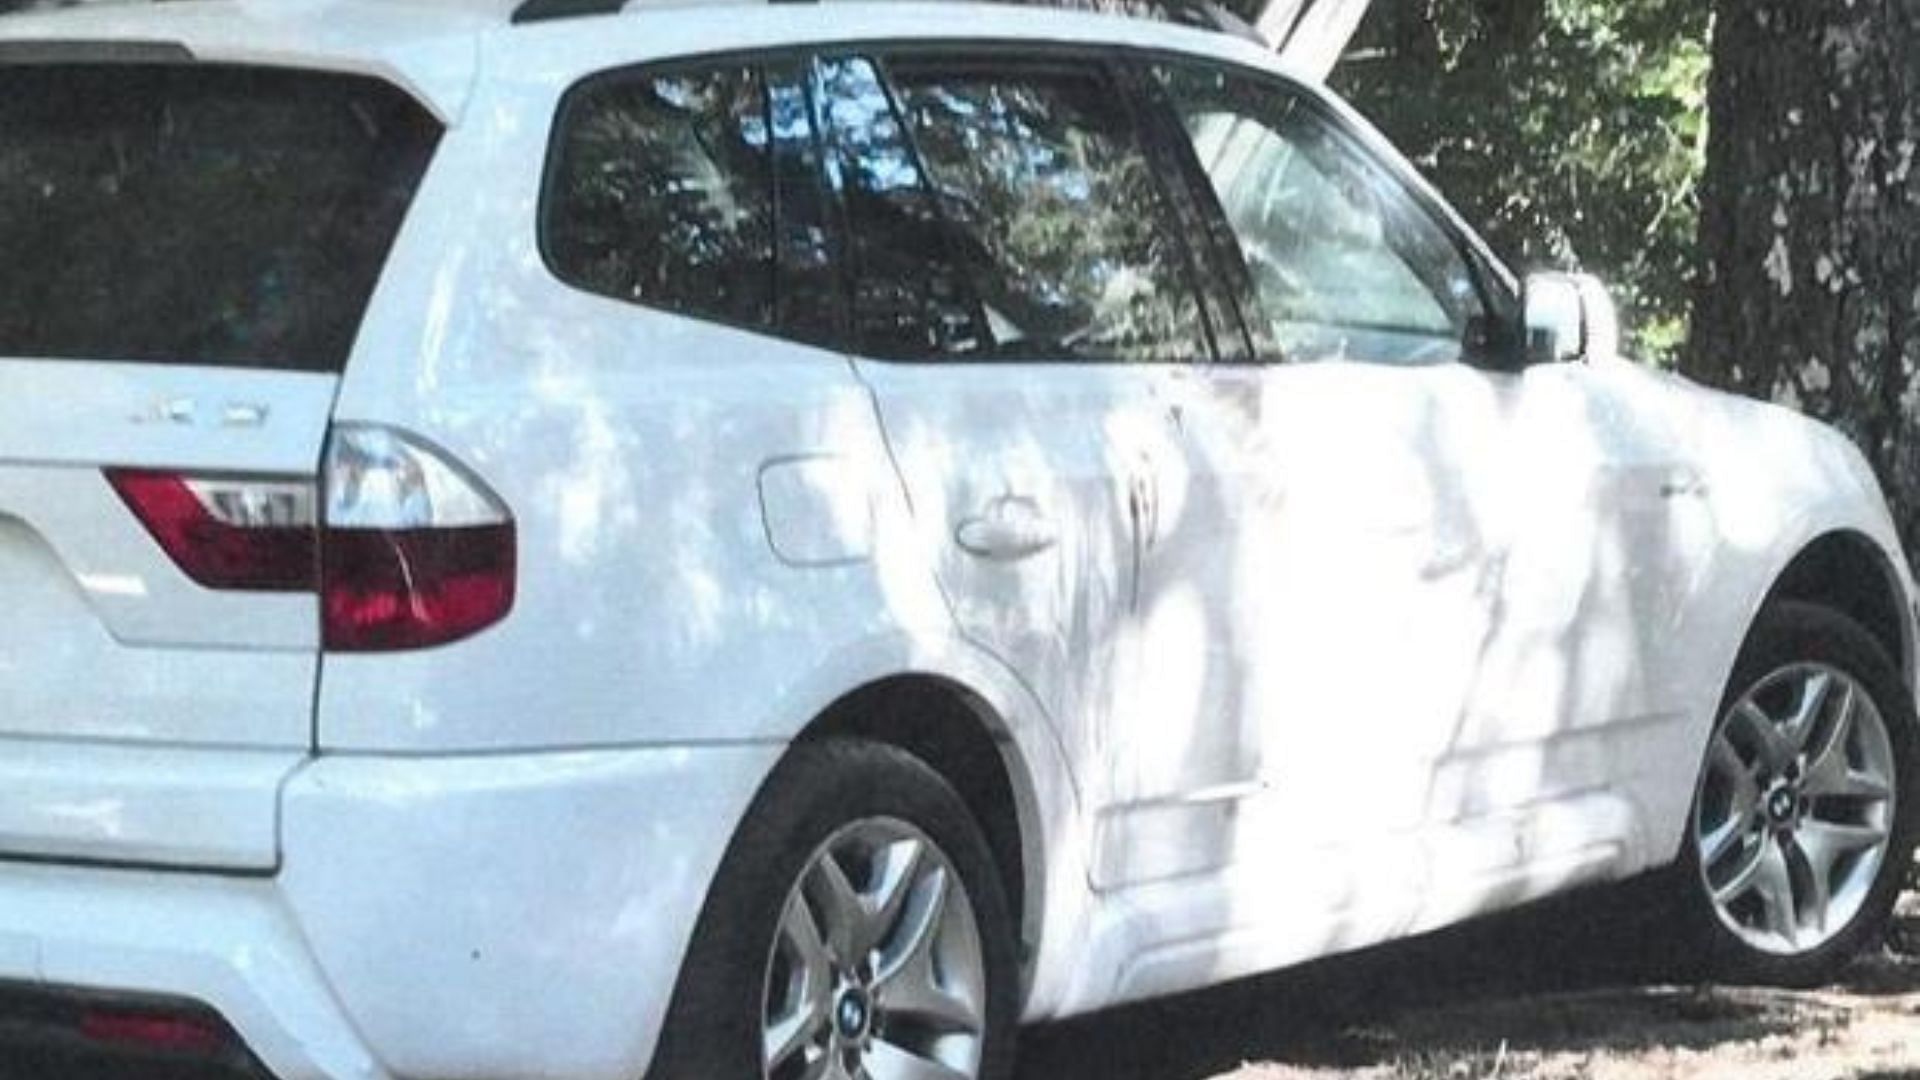 A still of the white BMW SUV that was used in the kidnapping of Tushar Atre (Image Via CBS News)